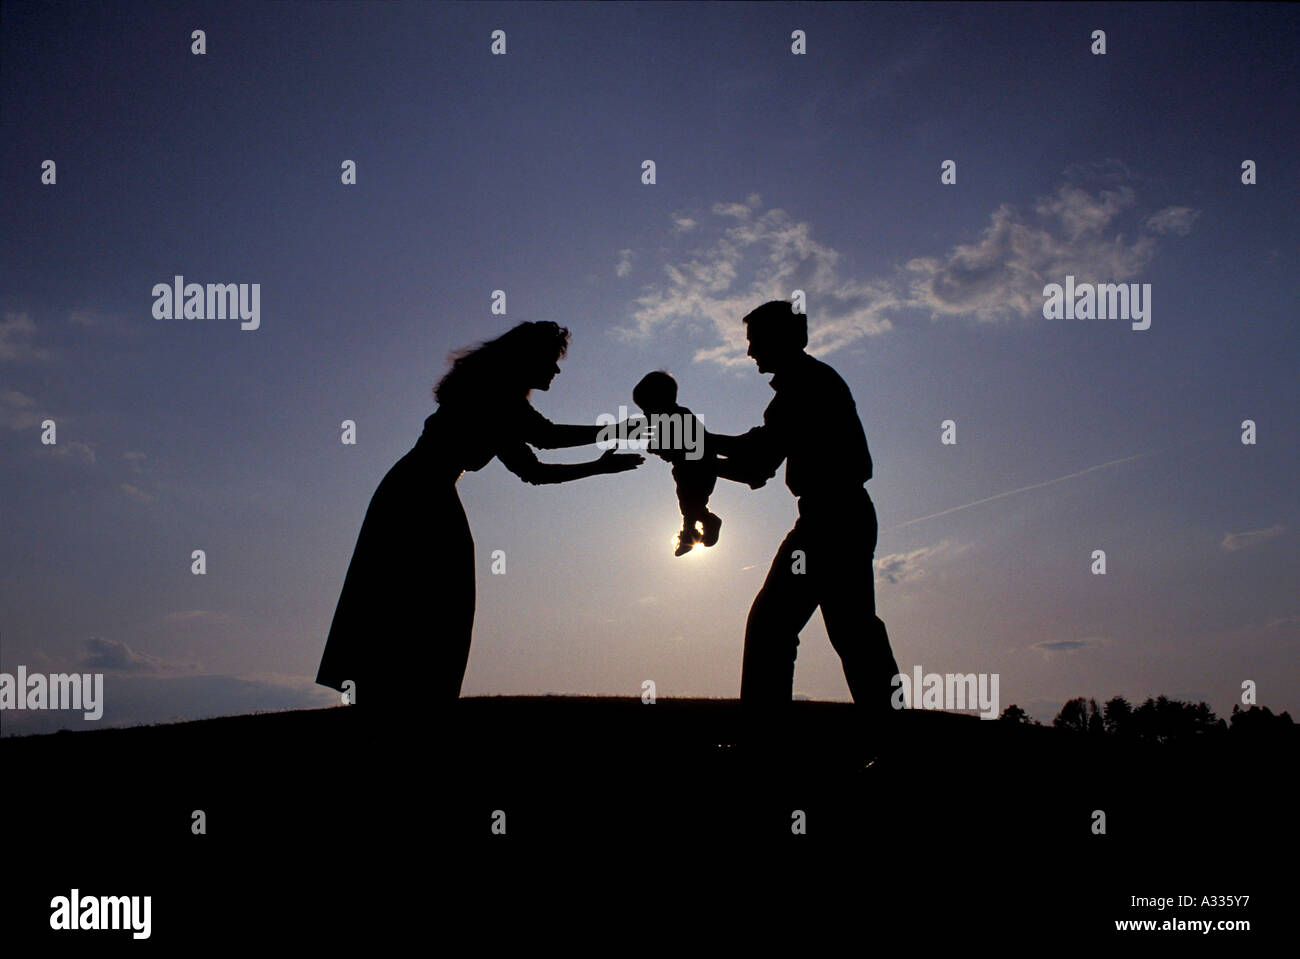 Silhouette of parents and baby MR1 6E4 Stock Photo